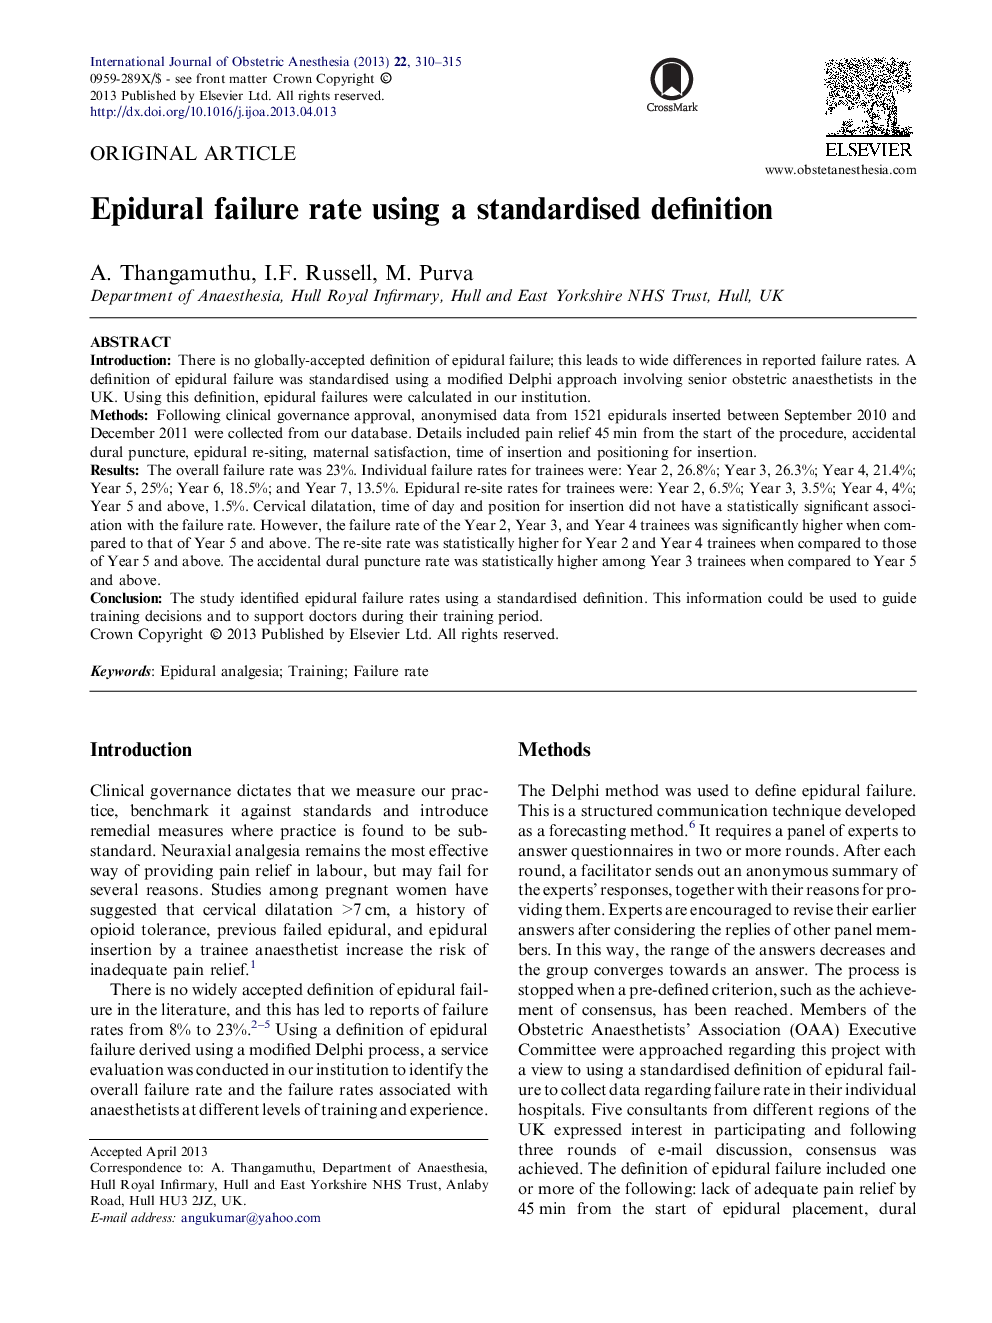 Epidural failure rate using a standardised definition